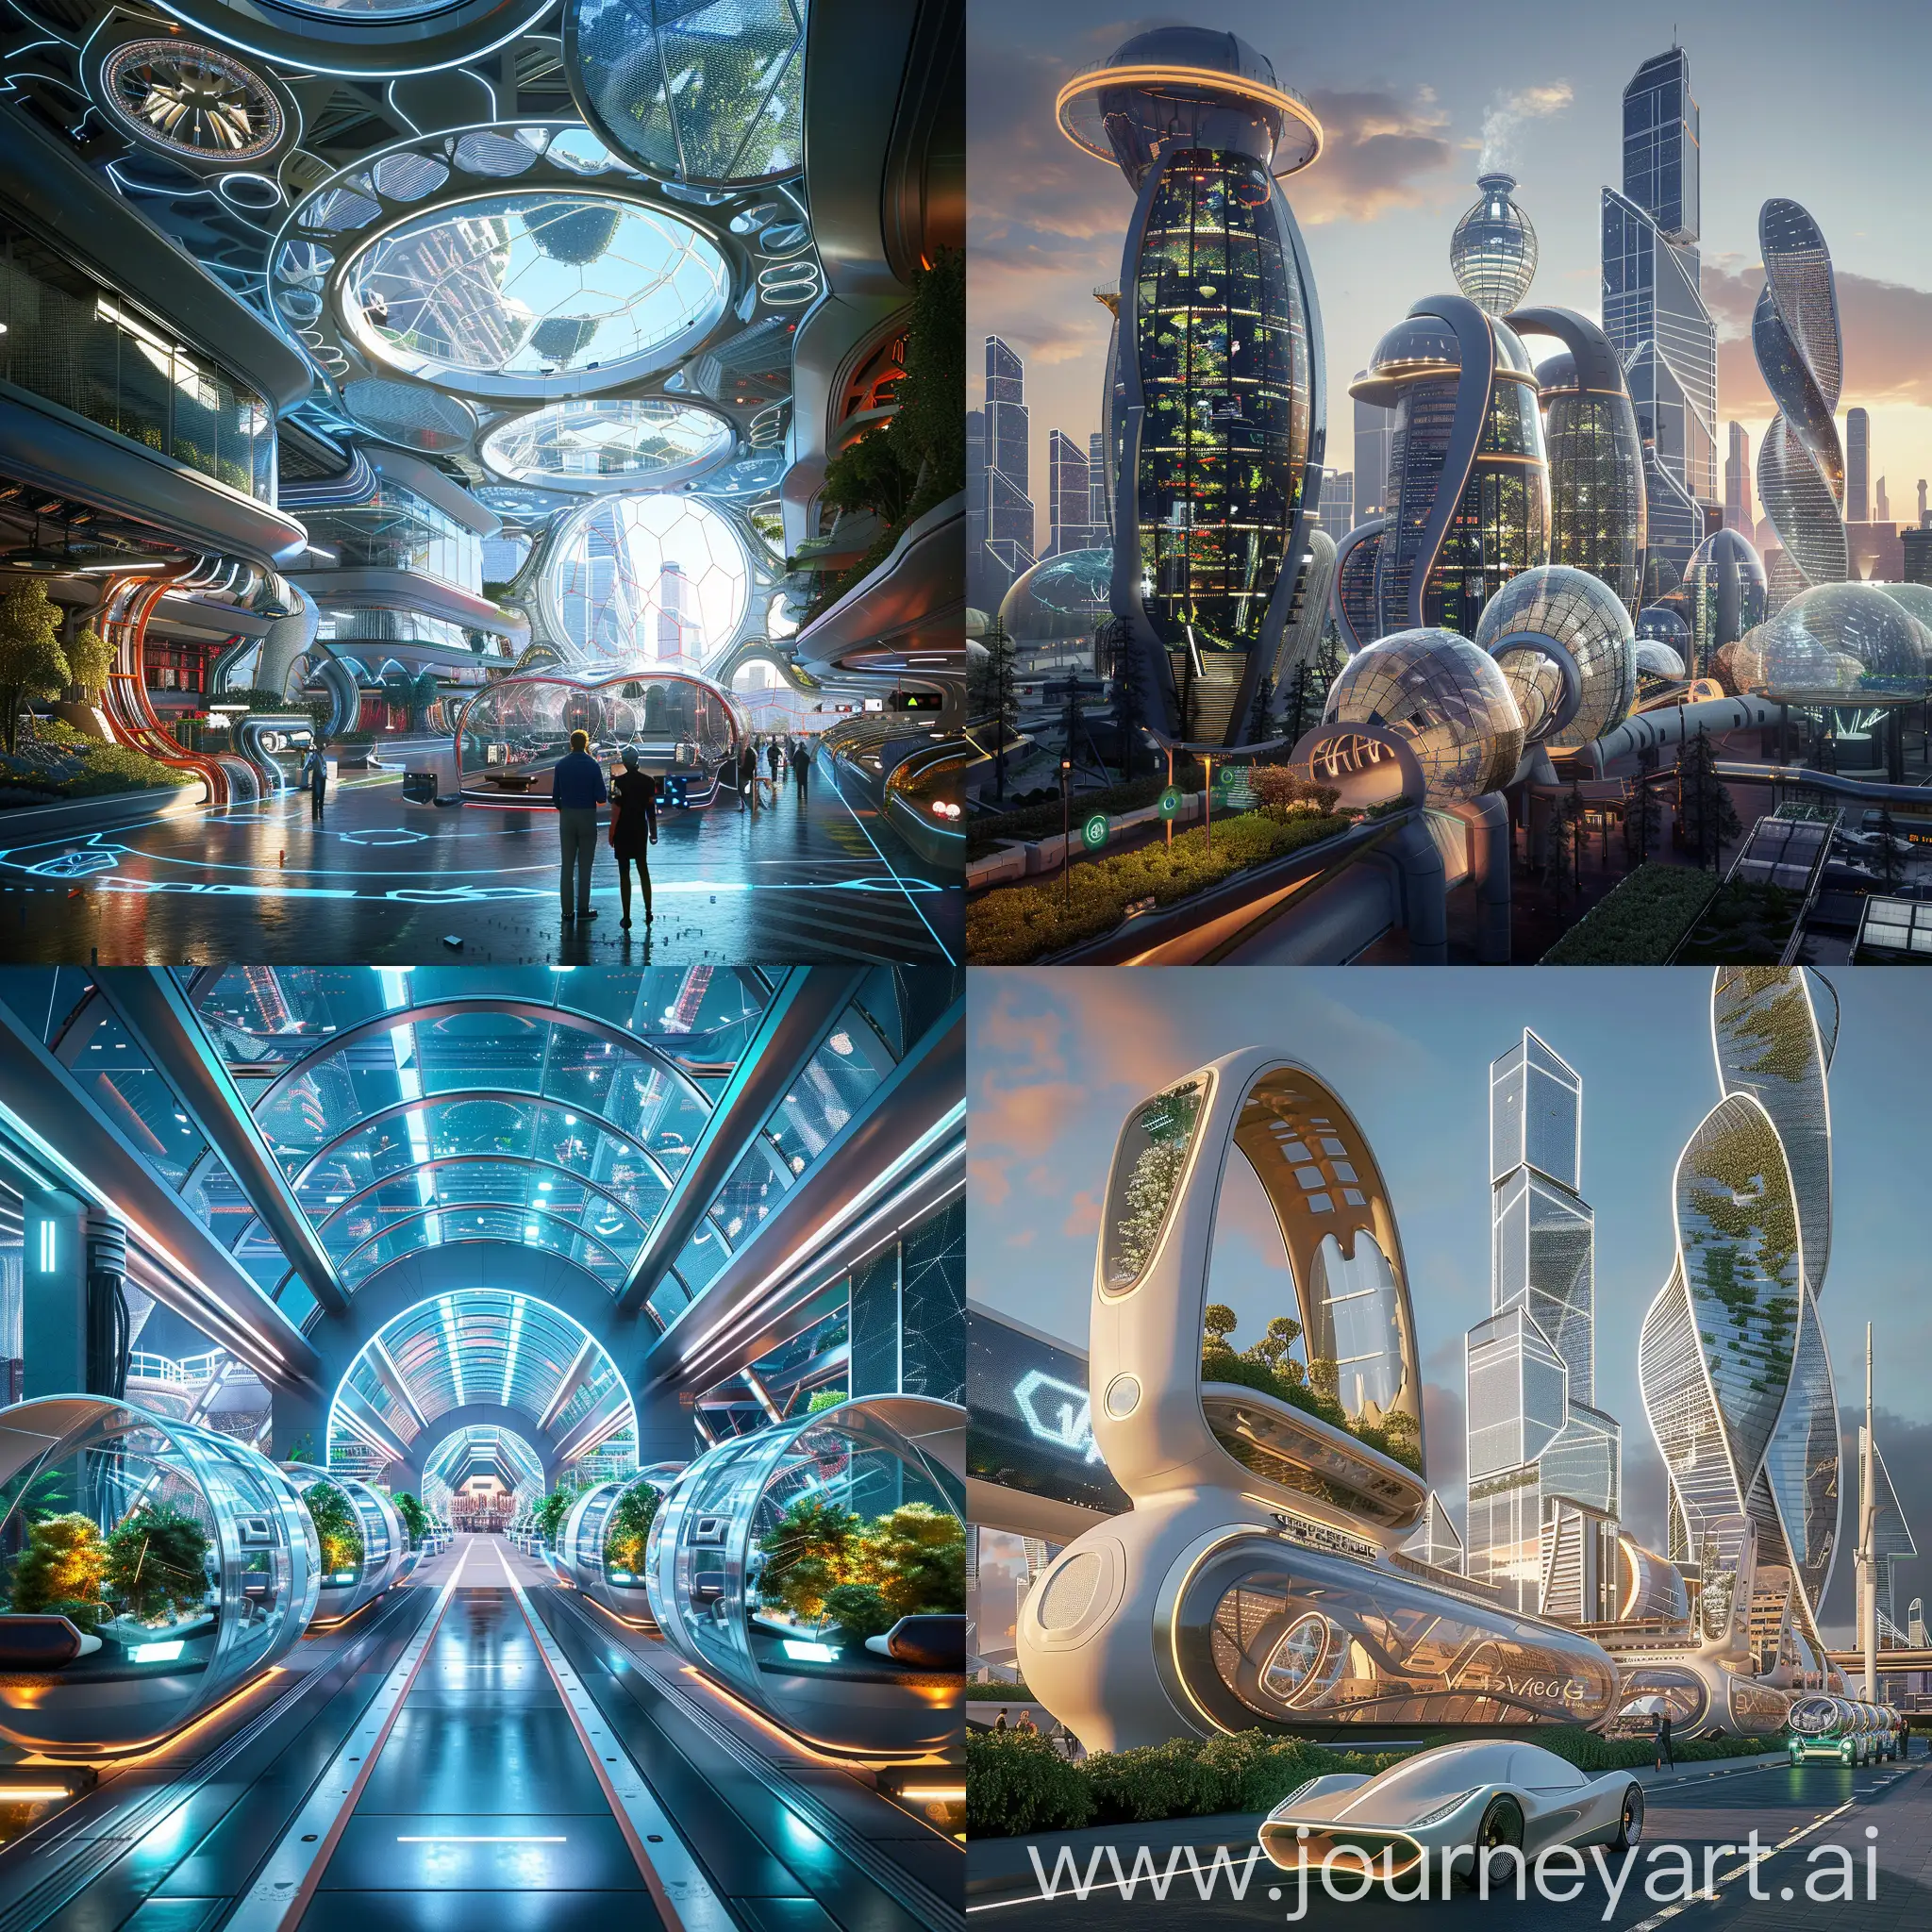 Futuristic-Moscow-Aerotroponic-Farms-Hyperloop-Pods-Kinetic-Facades-and-More